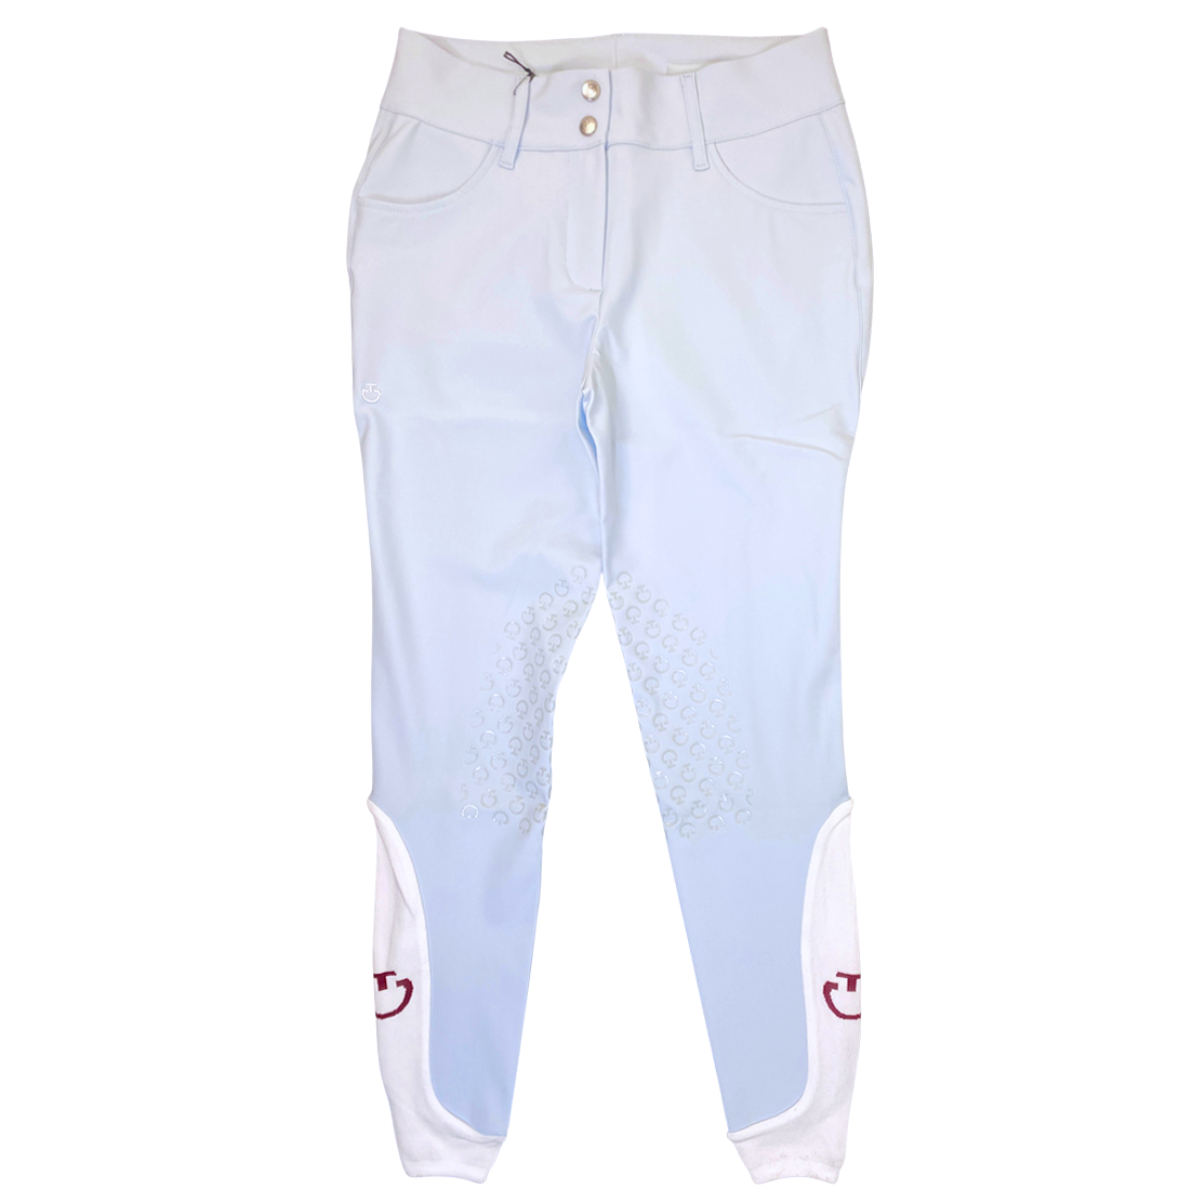 Cavalleria Toscana 'American' High Rise Jumping Breeches in Dove Blue